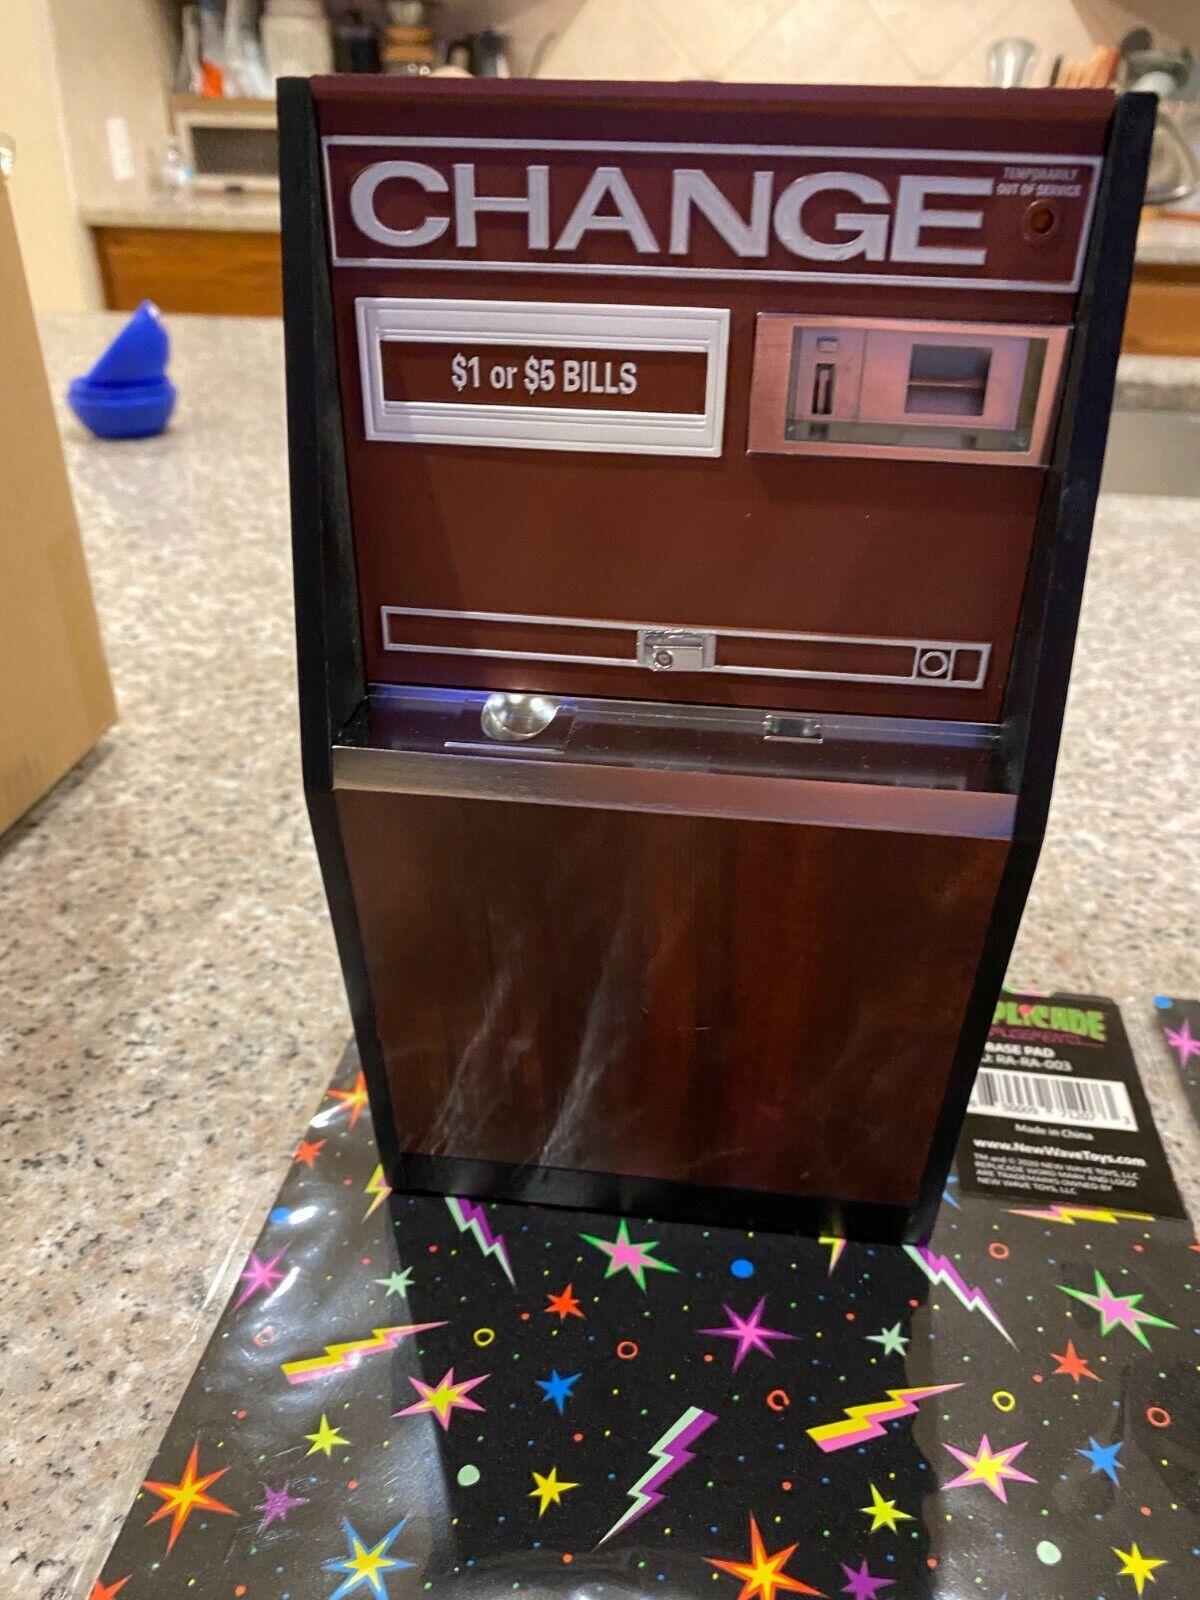 New Wave Toys RepliCade USB Charger Arcade Change Coin Machine SF2 UV mat lot